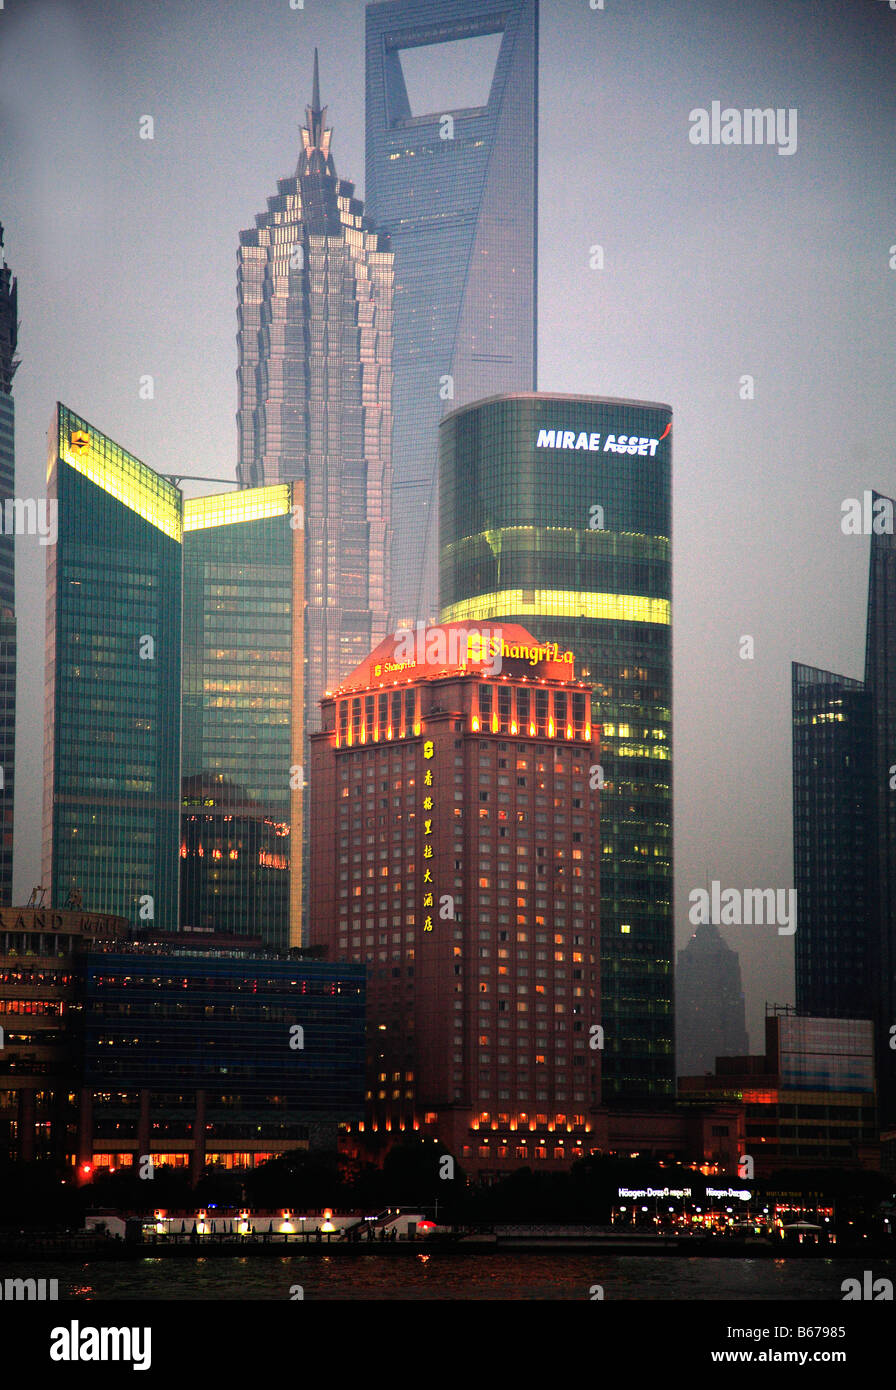 China Shanghai Pudong business district skyline Jinmao Tower World Finance Building Stock Photo